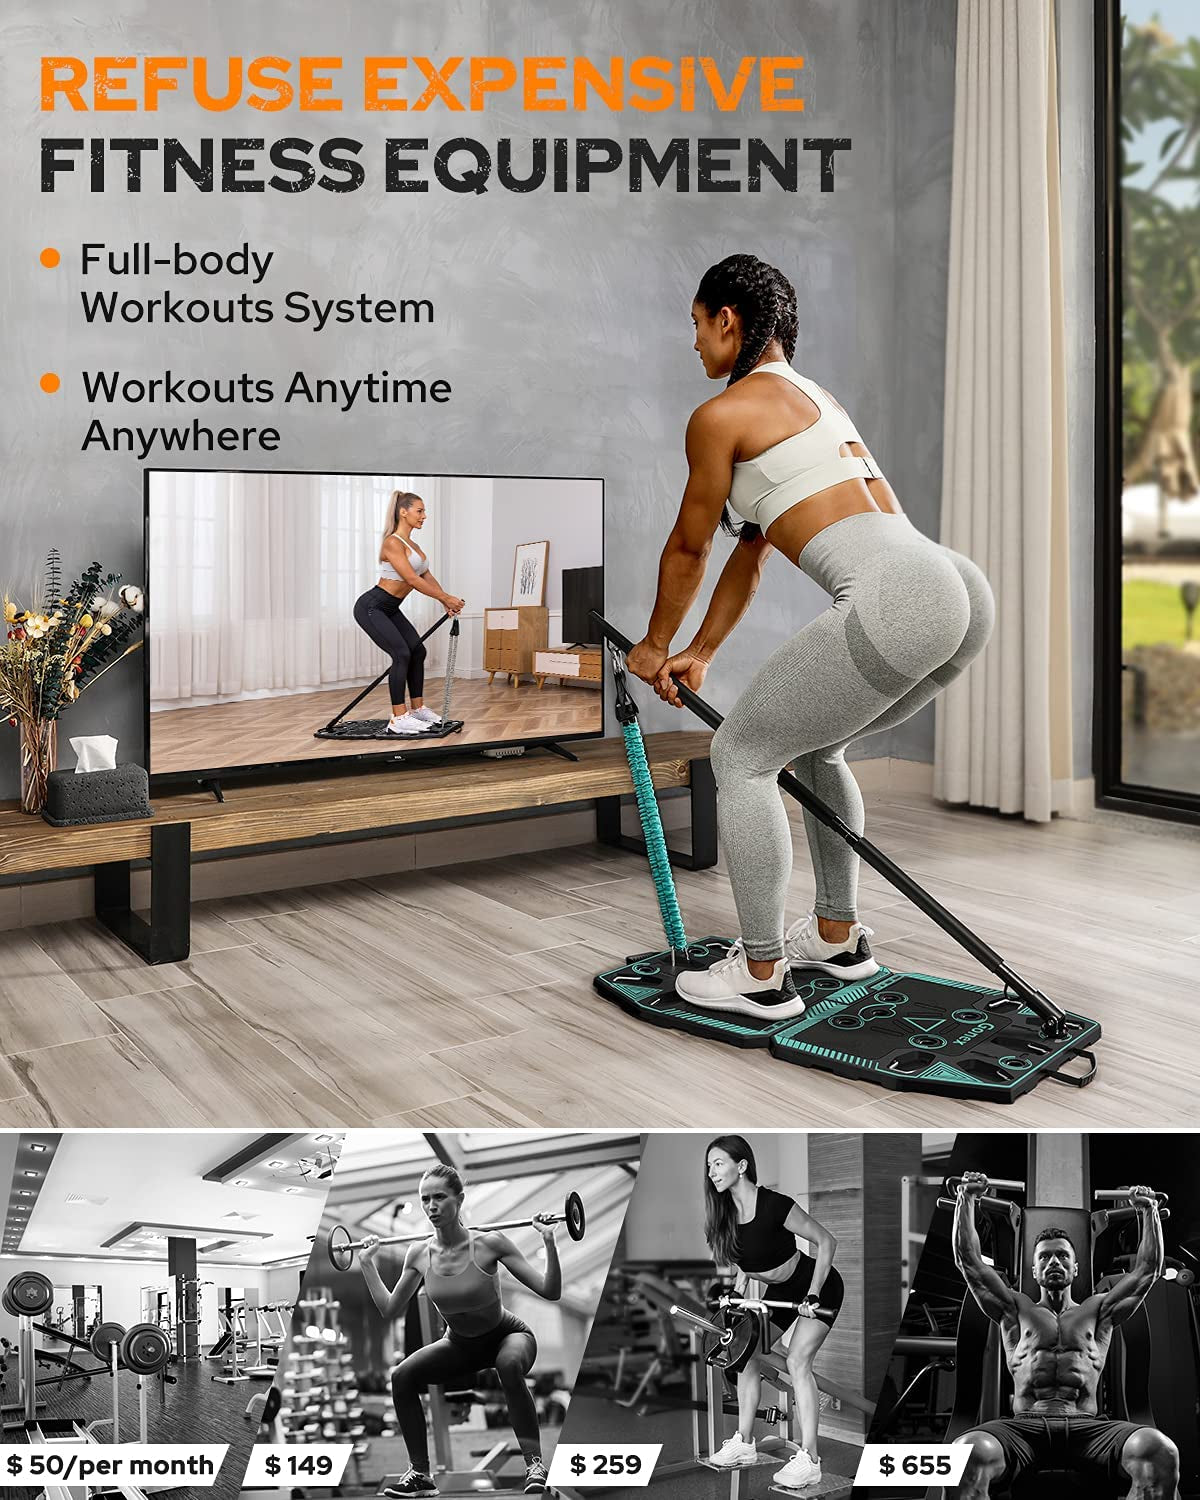 "Ultimate Portable Home Gym: Transform Your Body with 14 Exercise Accessories for Full Body Workouts!"